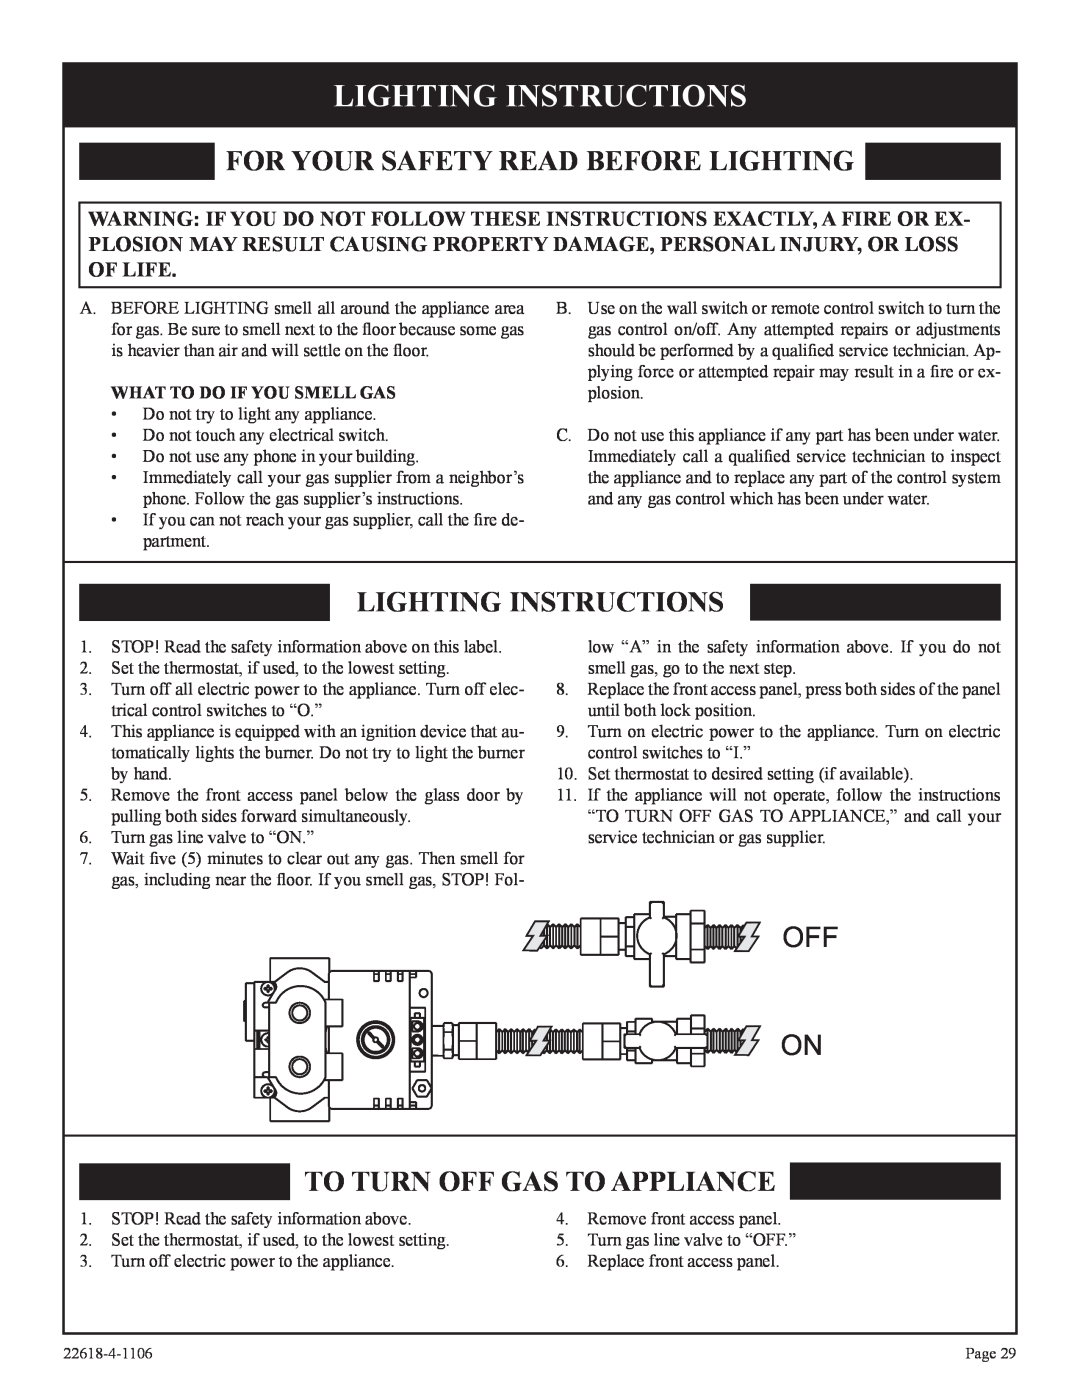 GN National Electric CP For Your Safety Read Before Lighting, Lighting Instructions, To Turn Off Gas To Appliance, Off On 